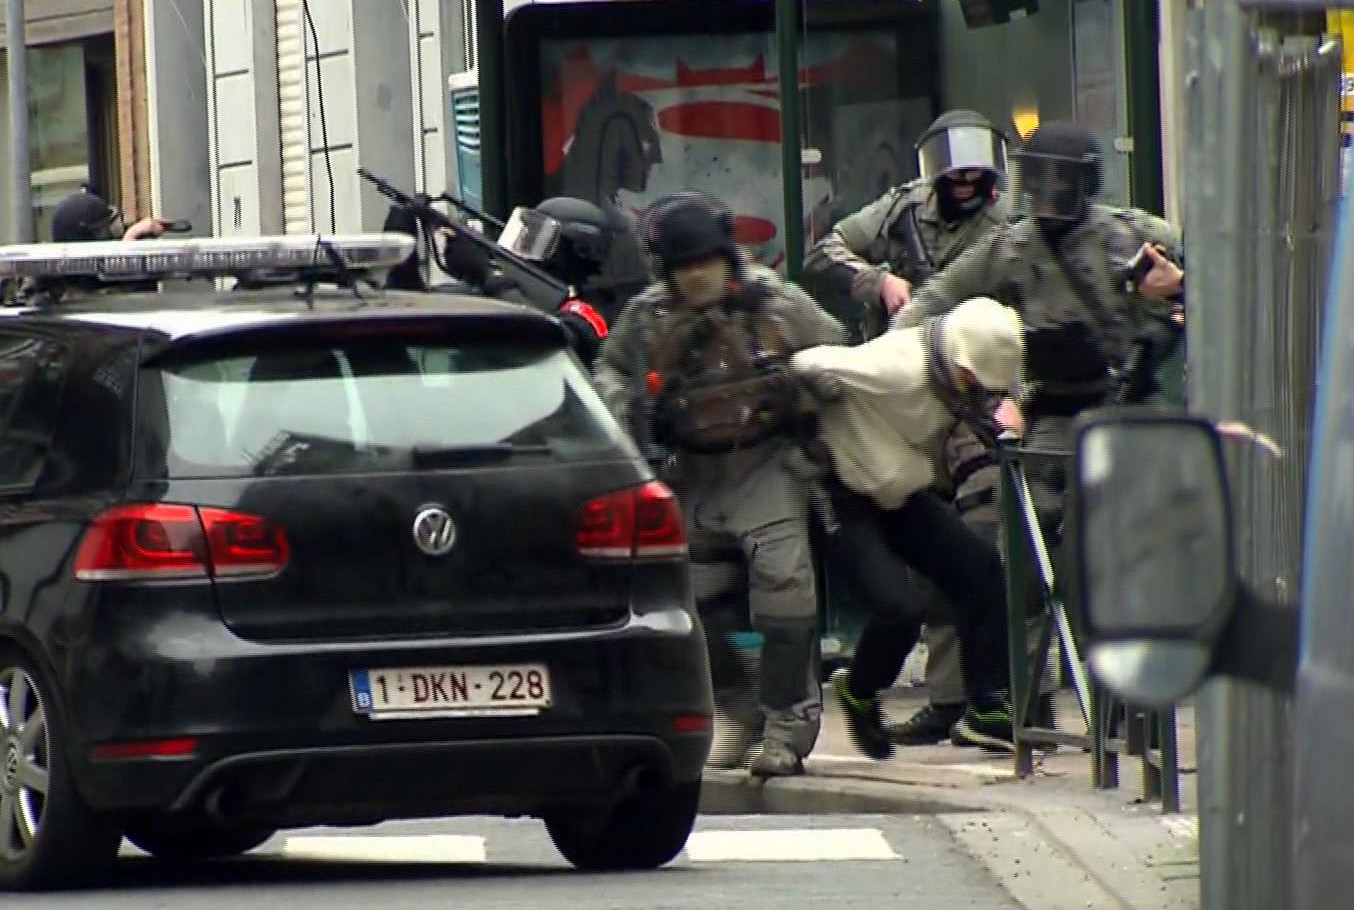 PHOTO: In this framegrab taken from VTM, armed police officers escort a suspect to a police vehicle during a raid in the Molenbeek neighborhood of Brussels,March 18, 2016.  